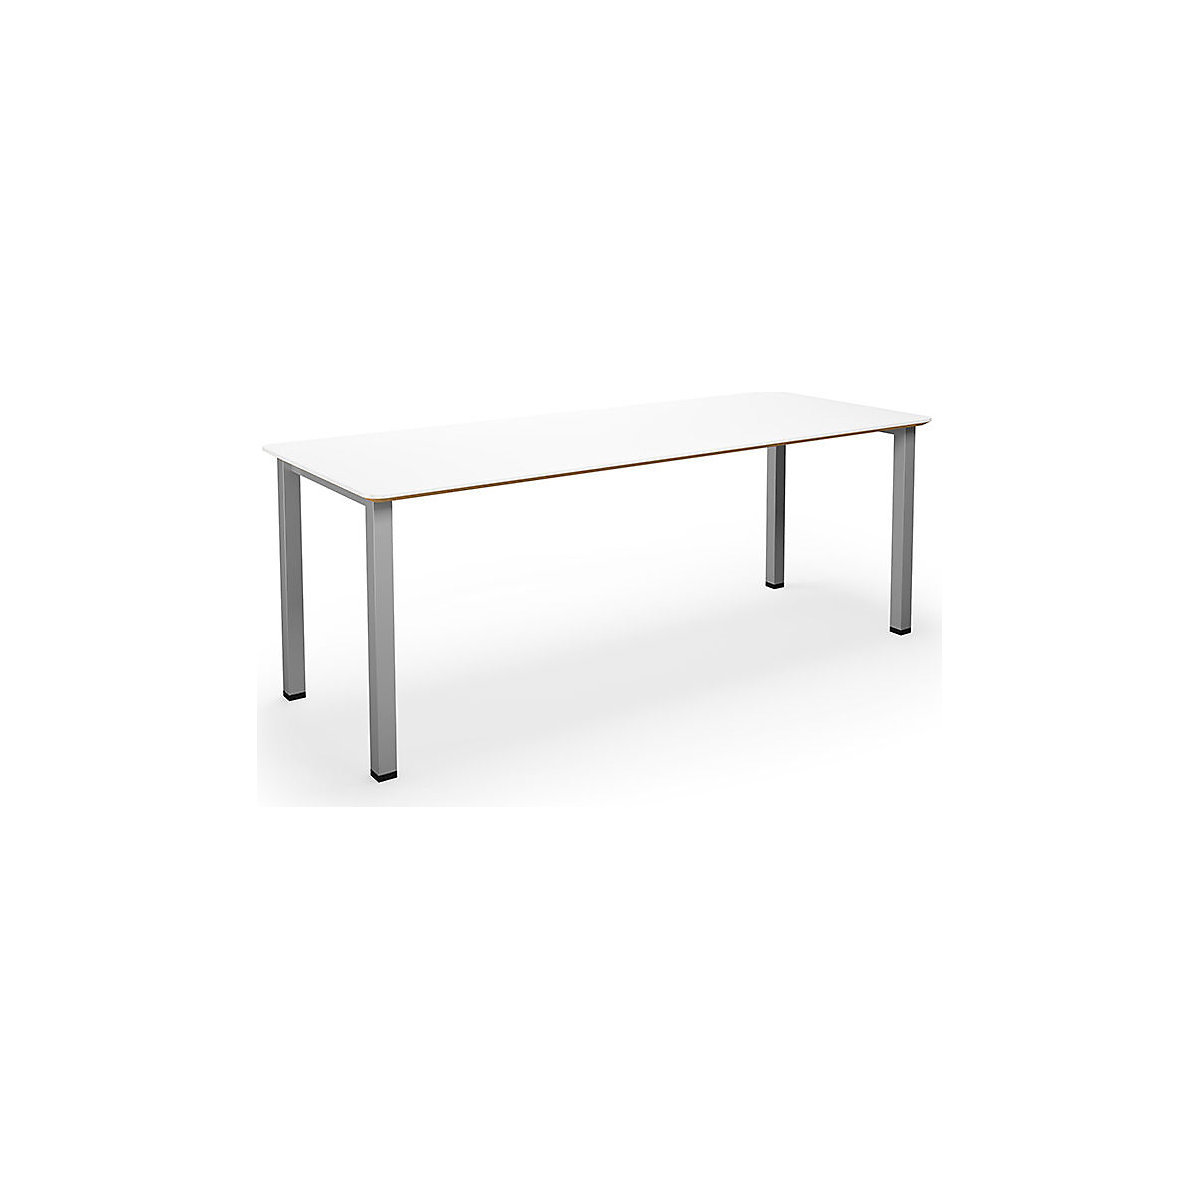 DUO-U Trend multi-purpose desk, straight tabletop, rounded corners, WxD 1800 x 800 mm, white, silver-4